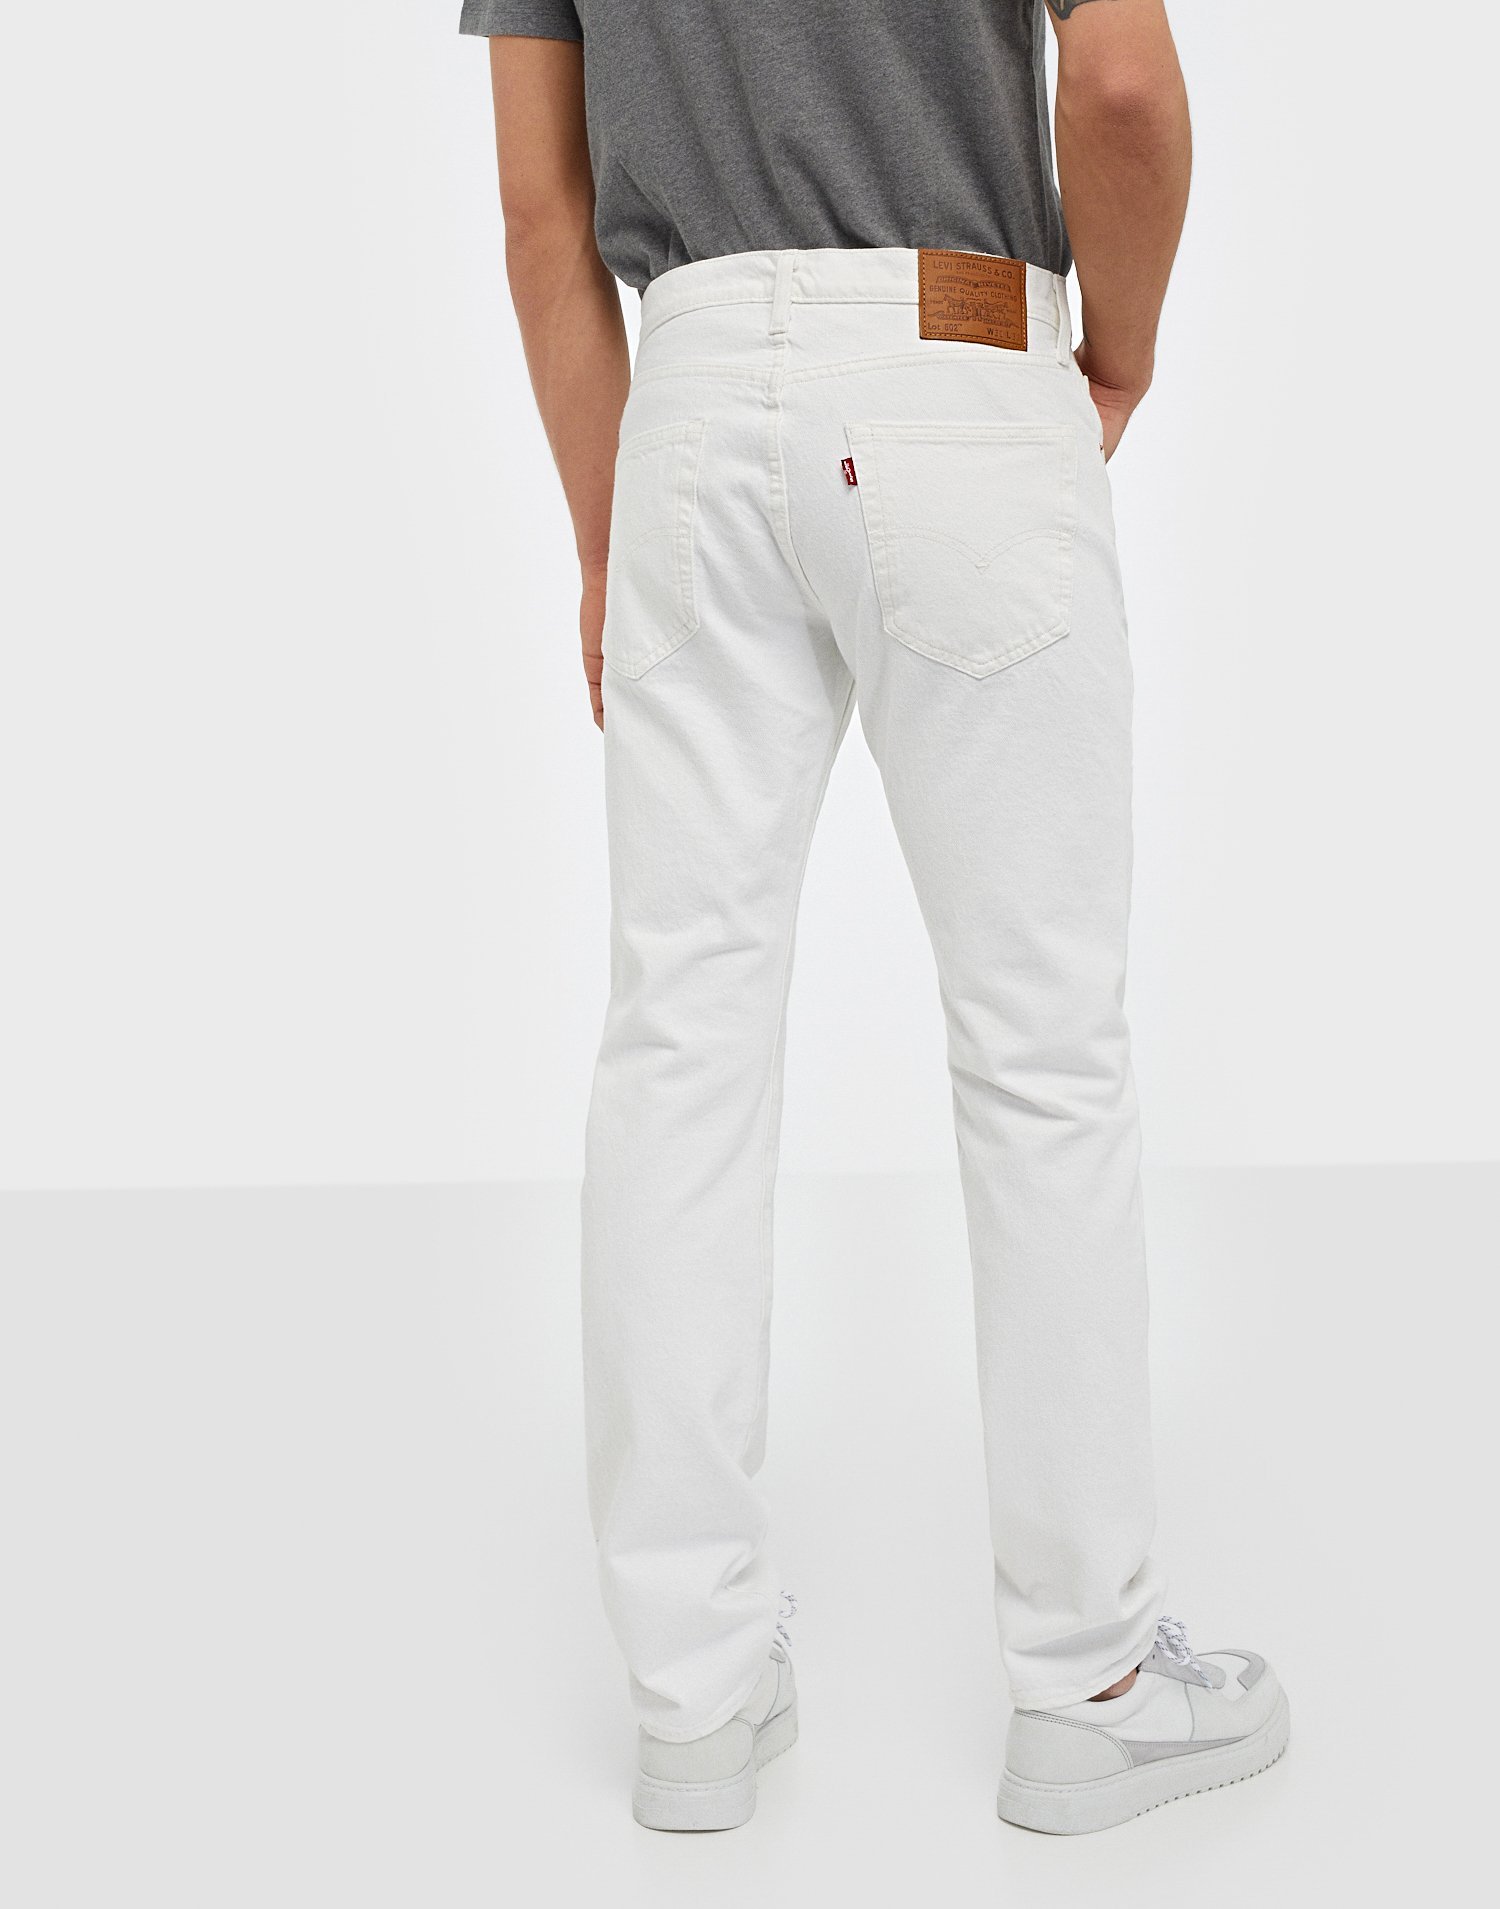 Shop Levis 502 TAPER TOOTHY WHITE 